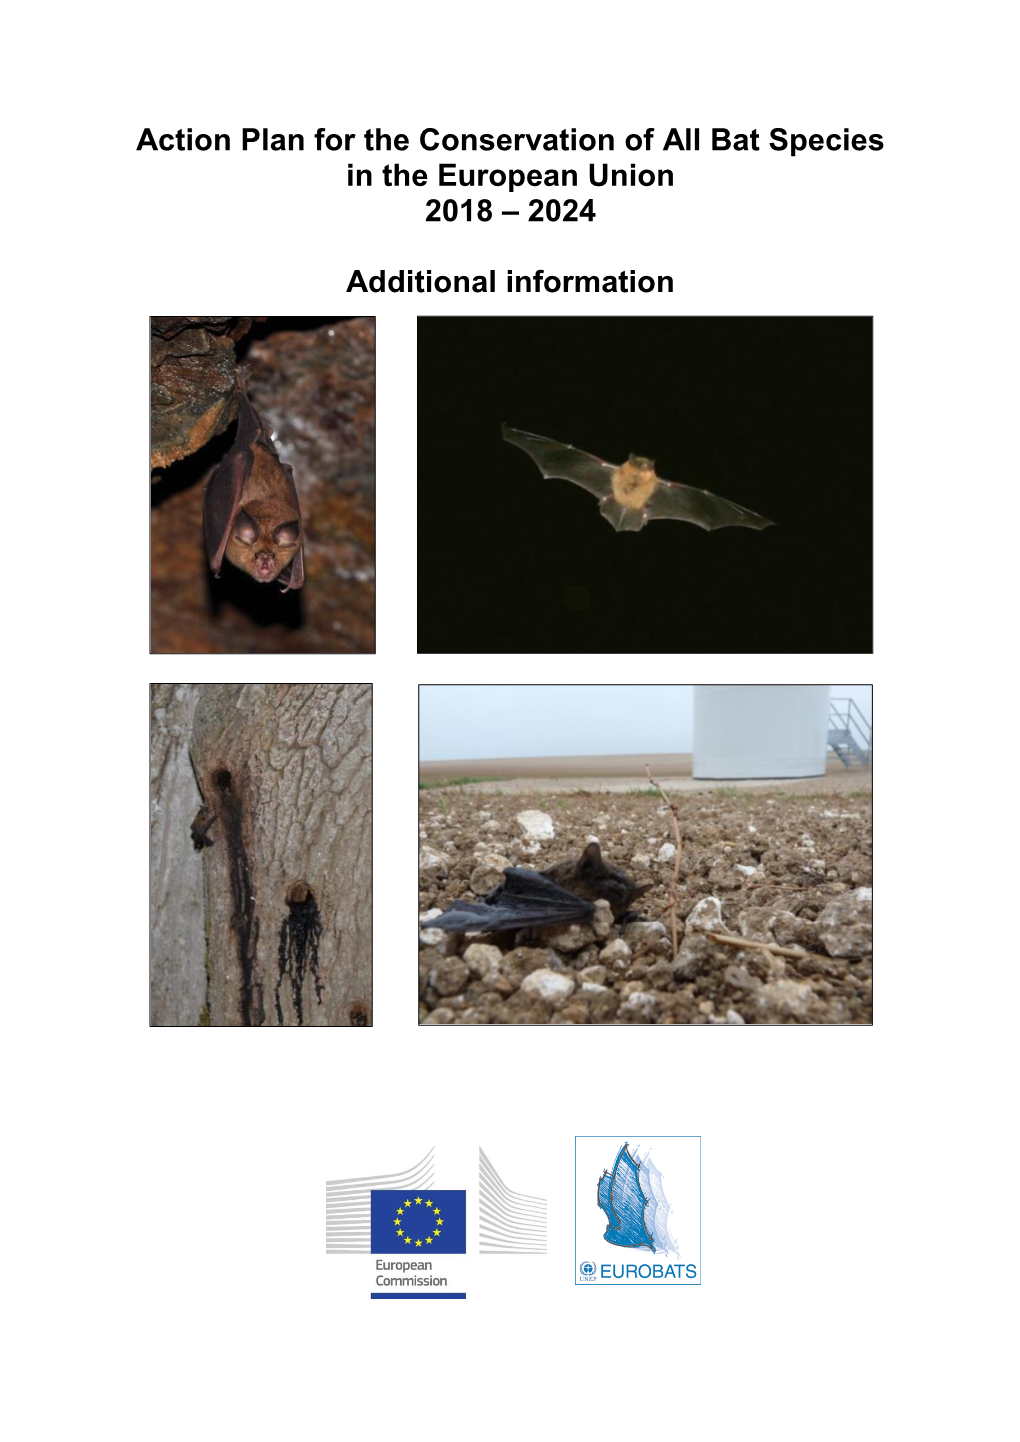 Action Plan for the Conservation of All Bat Species in the European Union 2018 – 2024